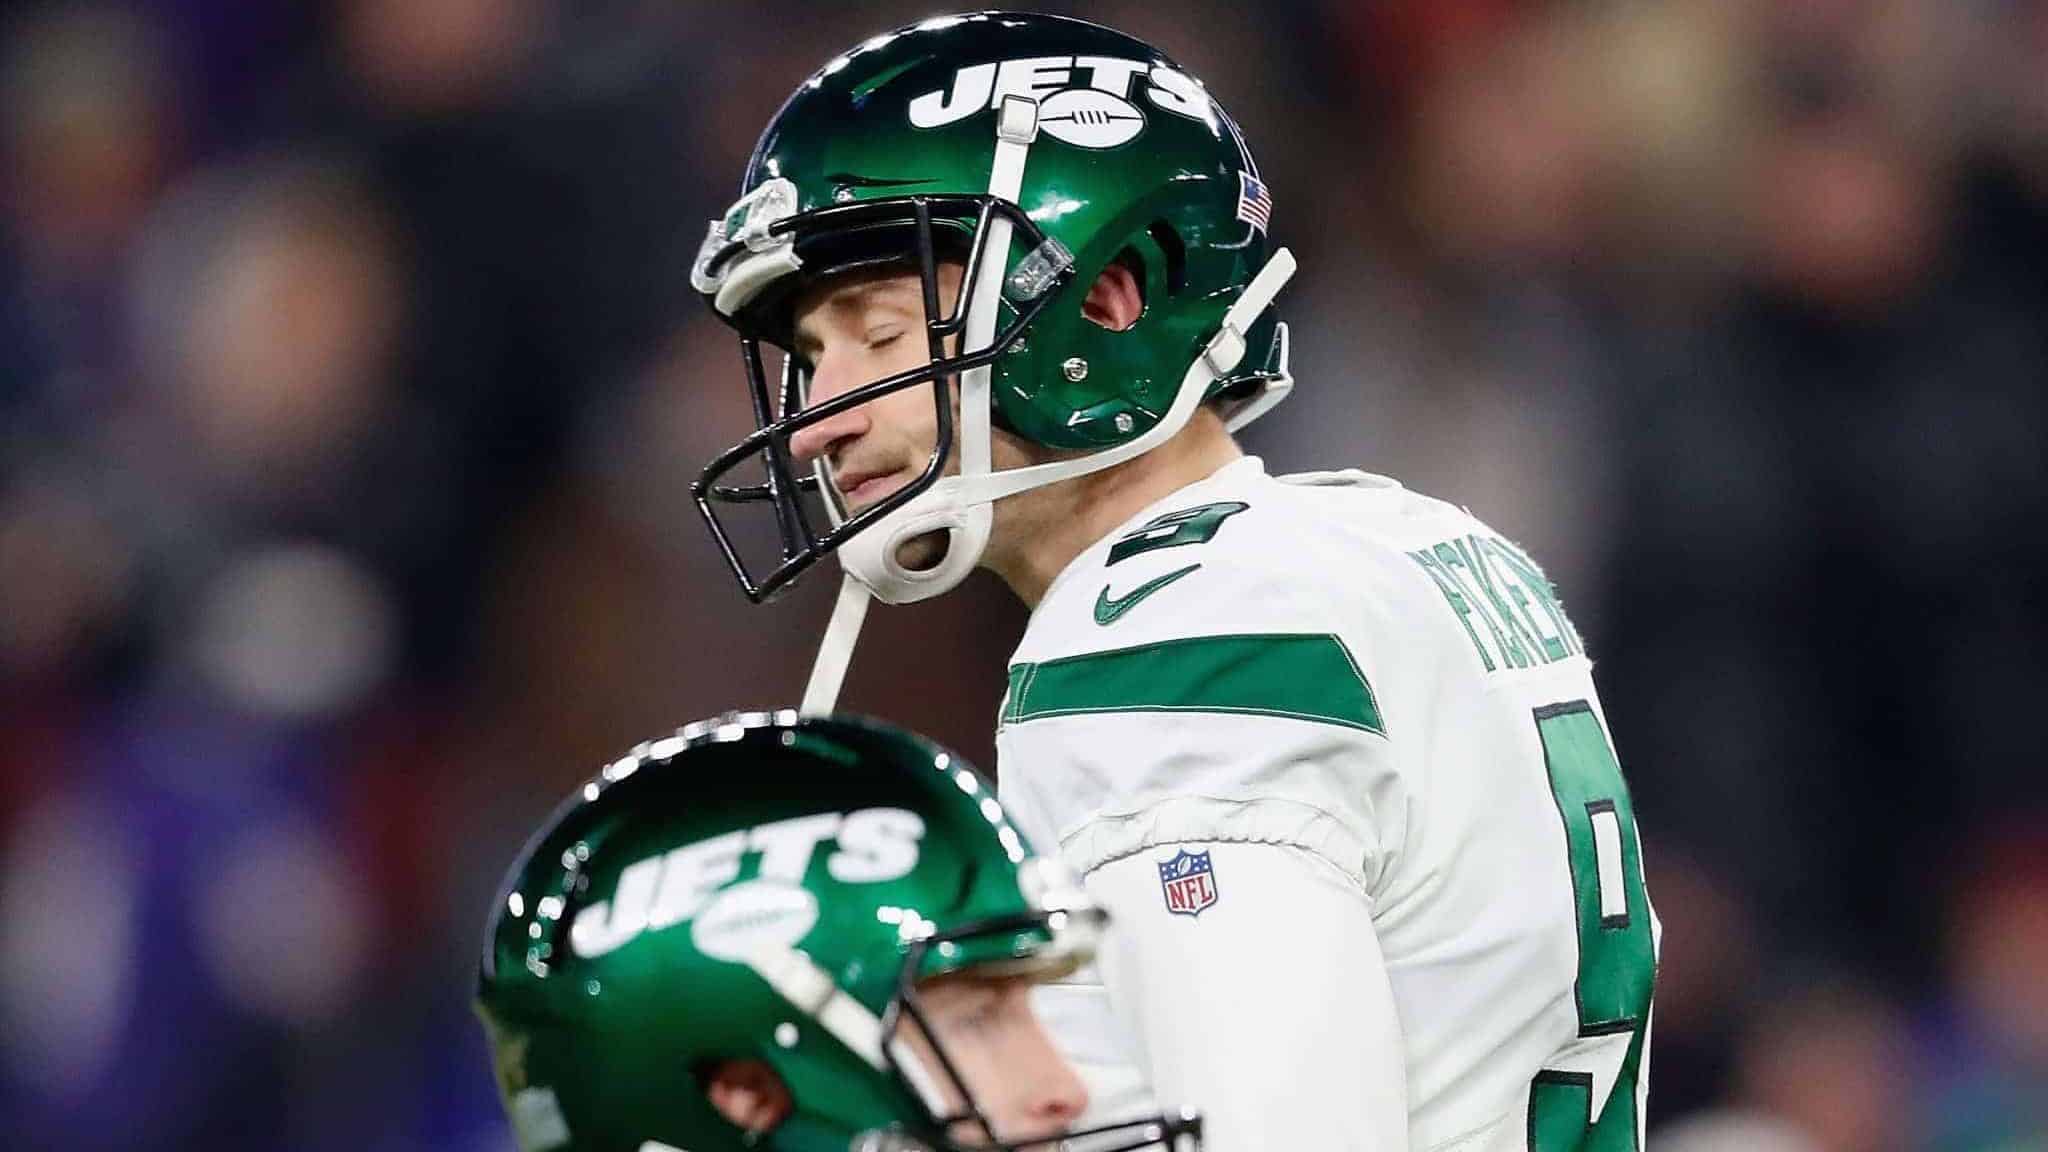 BALTIMORE, MARYLAND - DECEMBER 12: Kicker Sam Ficken #9 of the New York Jets misses an extra point during the game against the Baltimore Ravens at M&T Bank Stadium on December 12, 2019 in Baltimore, Maryland.